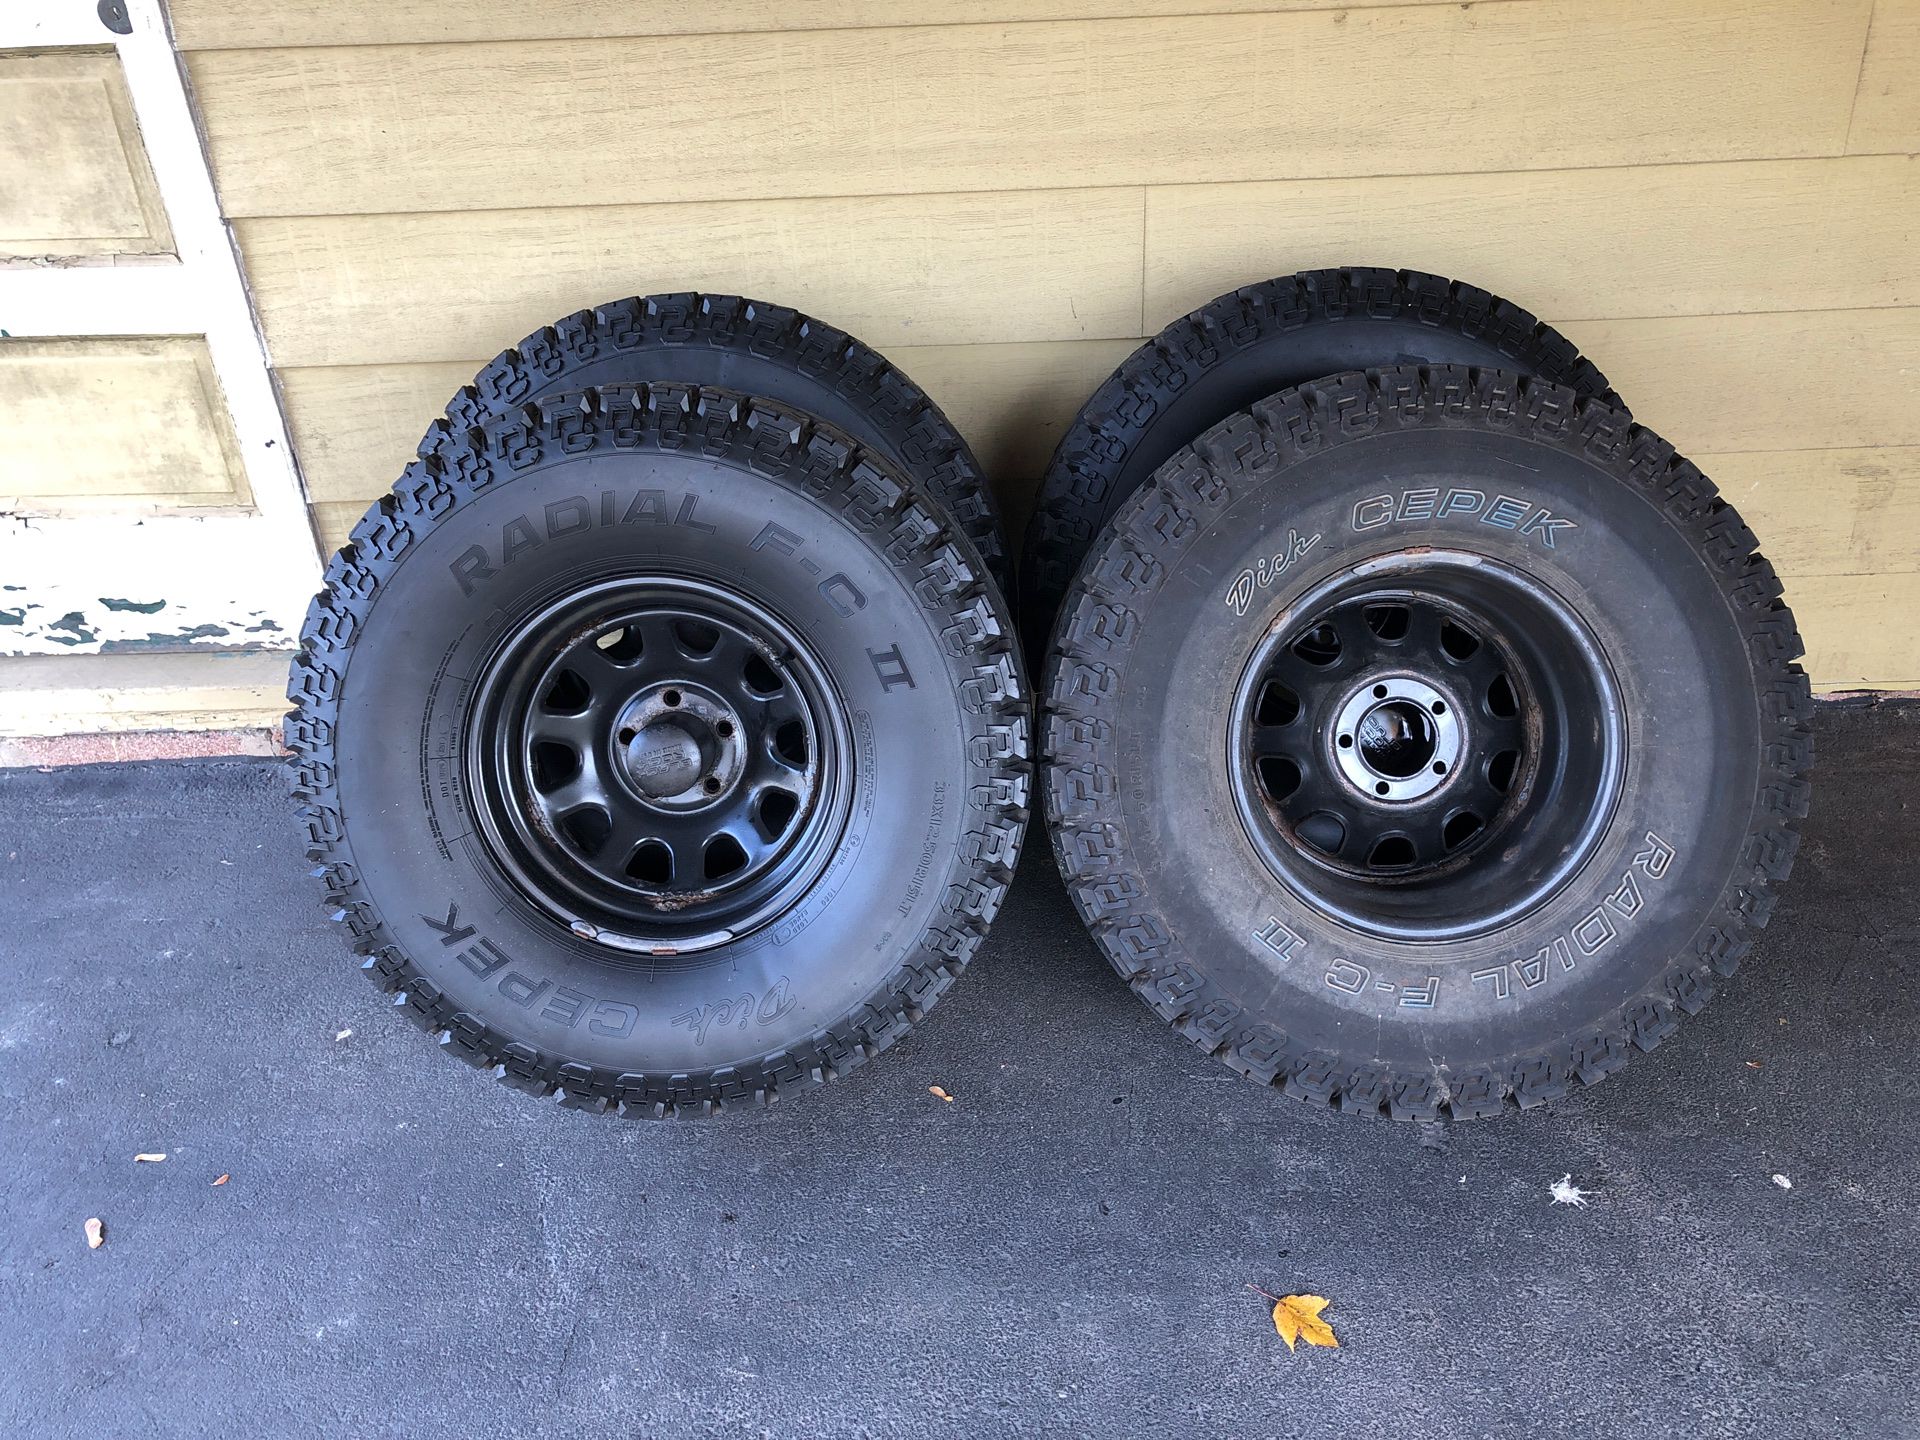 5 Dick Cepak 33x 12.5x 15 tires mounted on black steel rims. Jeep 5x4.5 bolt pattern. Local pick up only